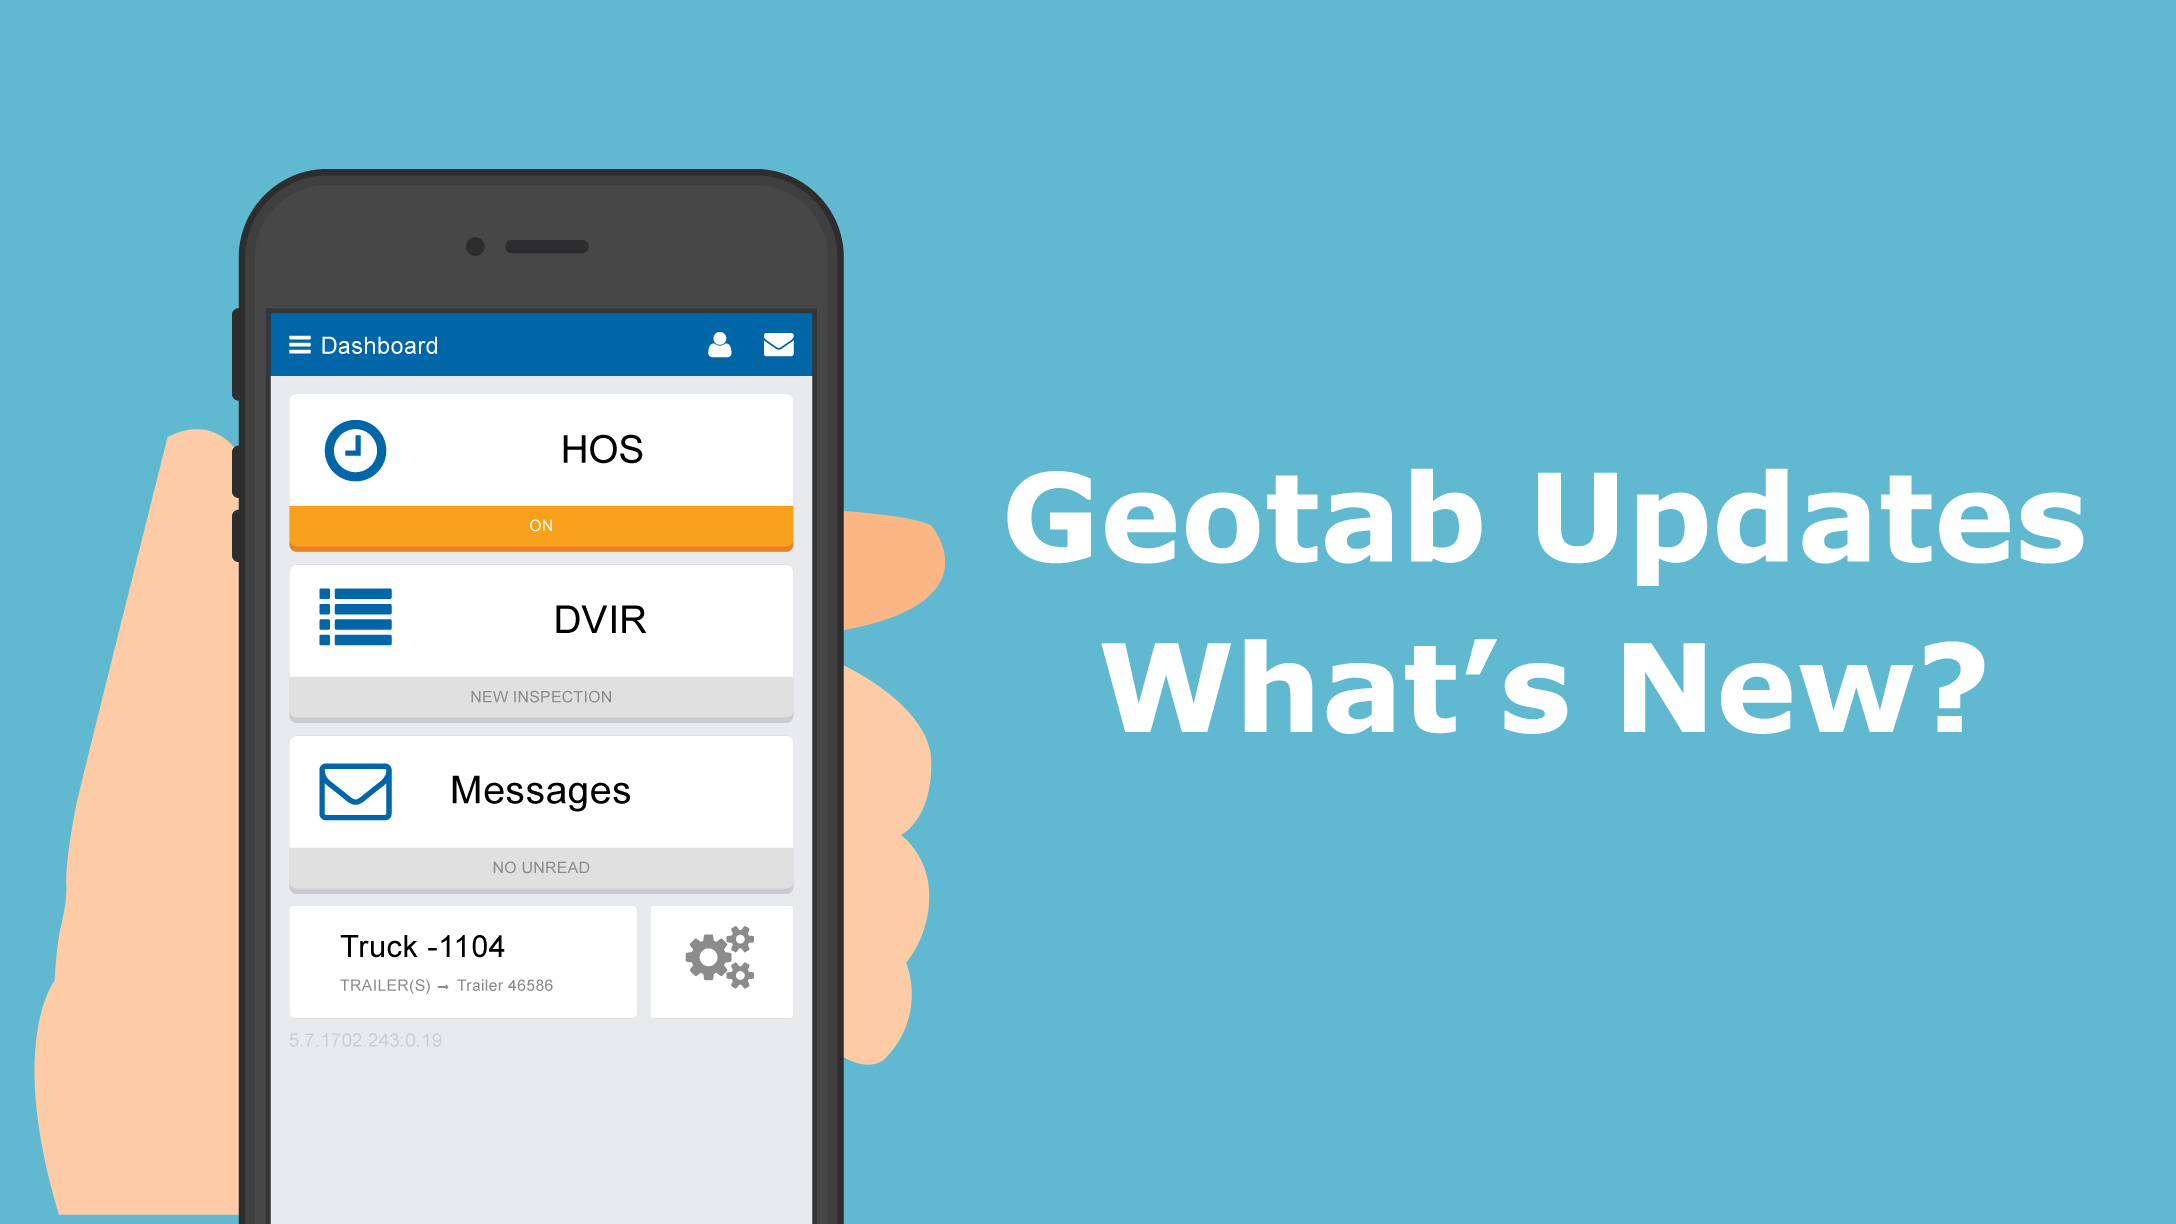 "Geotab Updates What's New?" text beside cartoon image of a phone showing MyGeotab dashboard